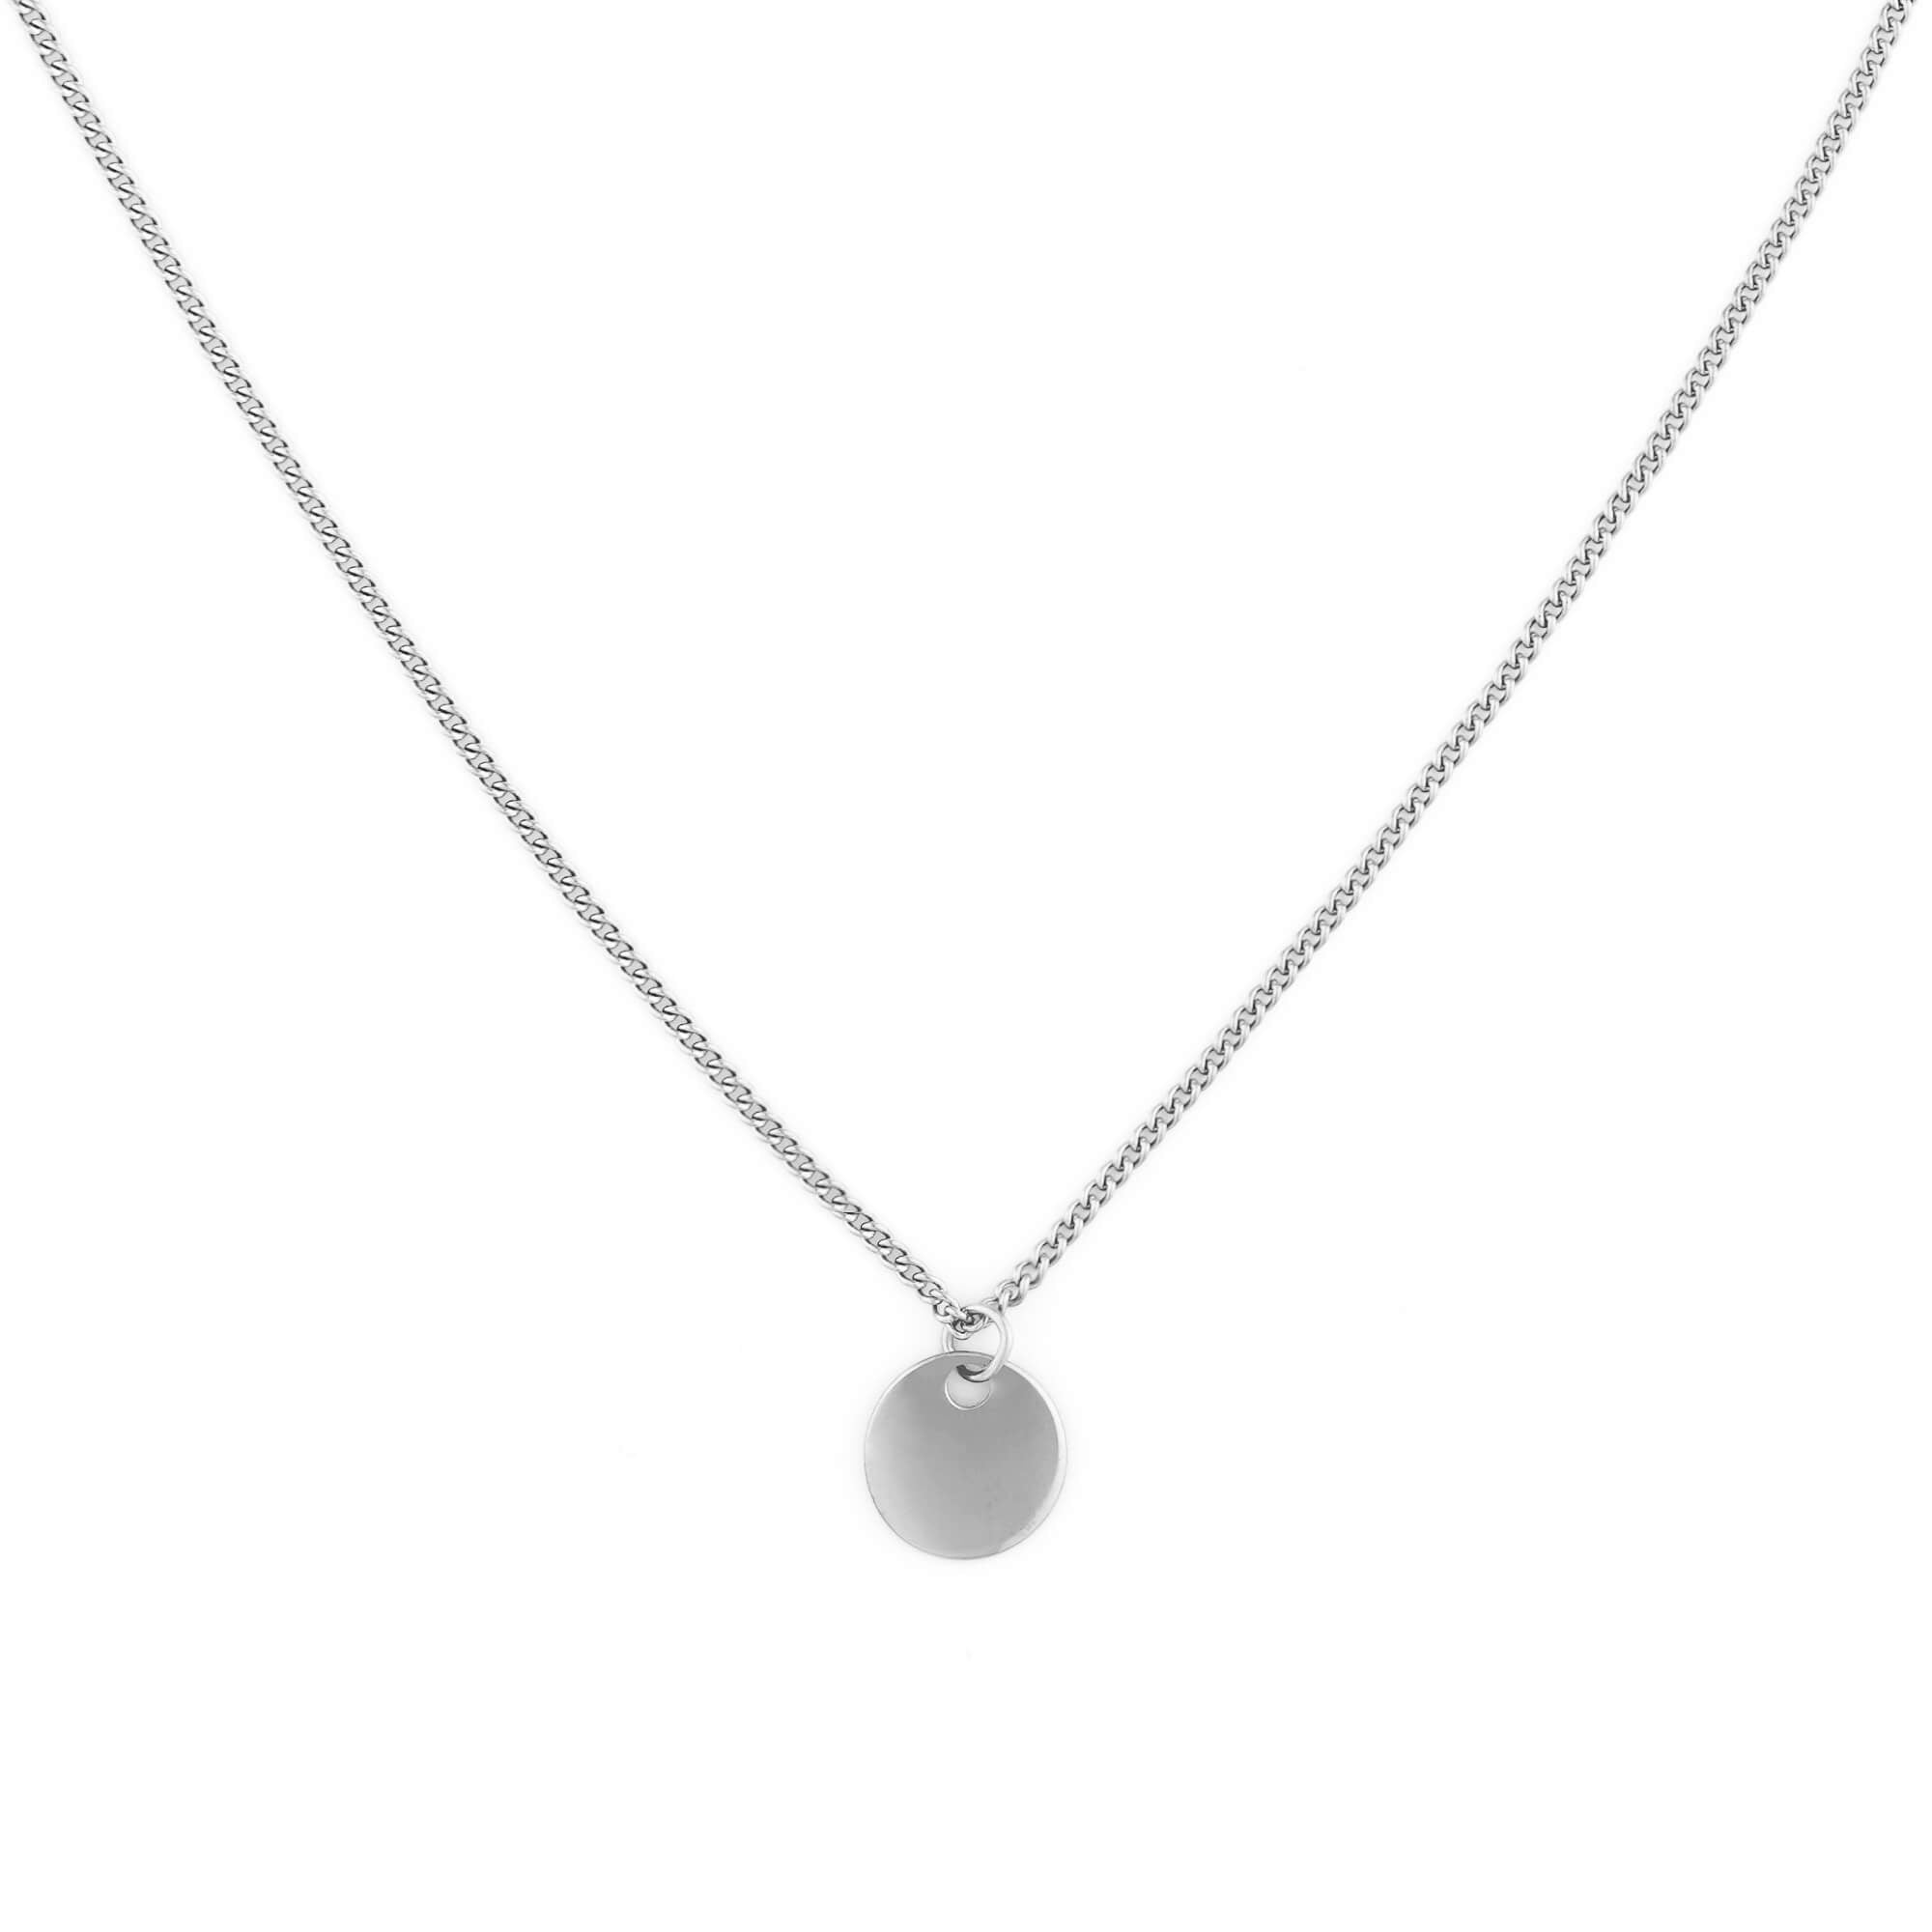 fj watches five jwlry jewel jewelry bijou karna round rond small pendant necklace collier pendentif cercle chain 1.5mm mini fj watches stainless steel acier inoxydable women femme silver argent montreal canada design water proof resistant eau thin fine